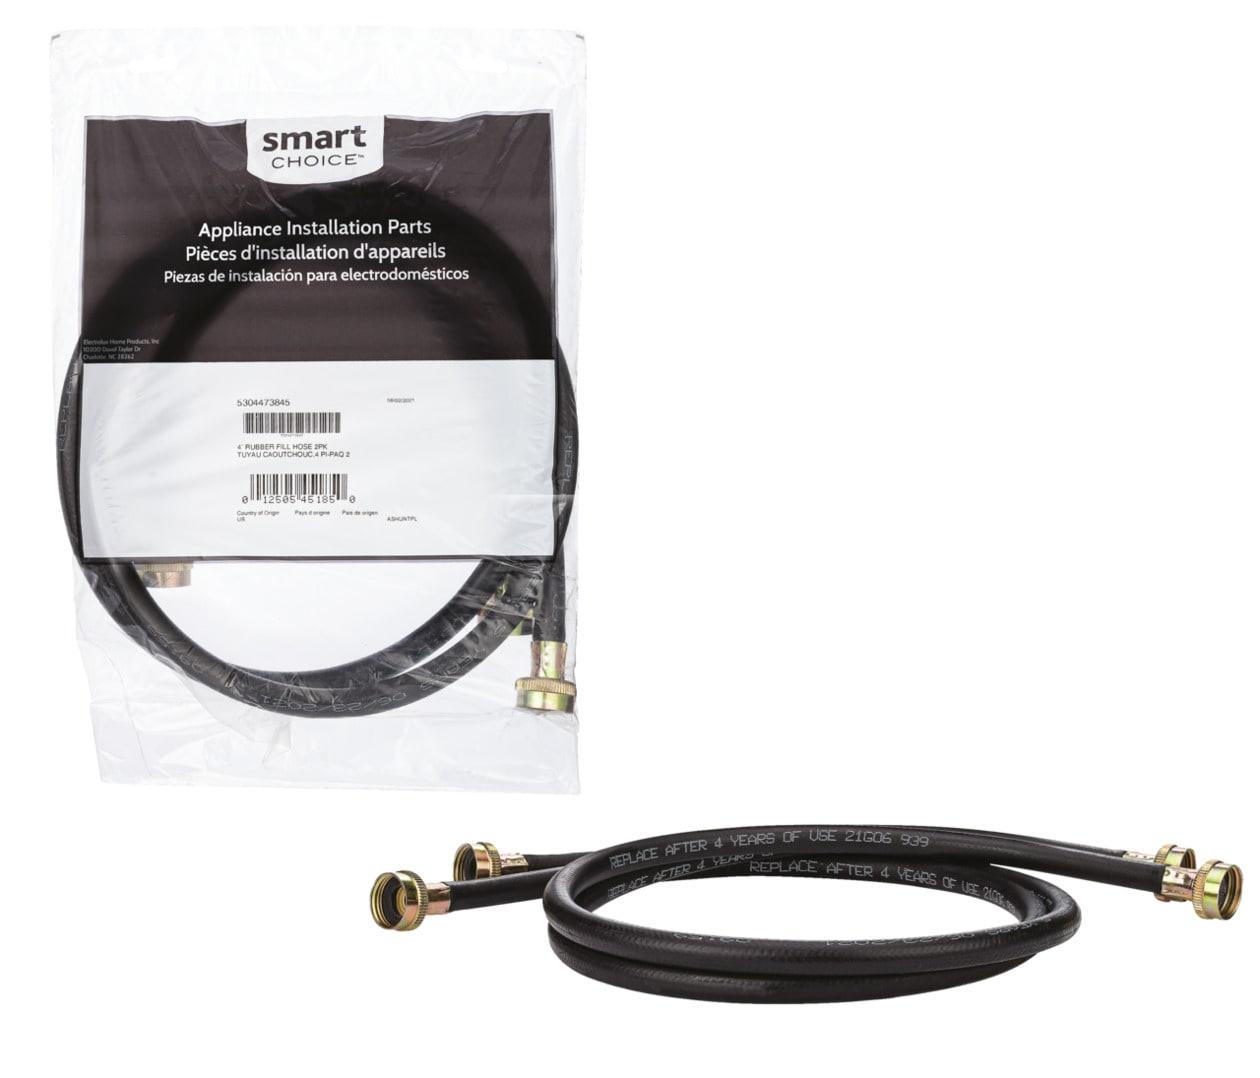 Smart Choice 4' Laundry Rubber Fill Hose - 2 pack